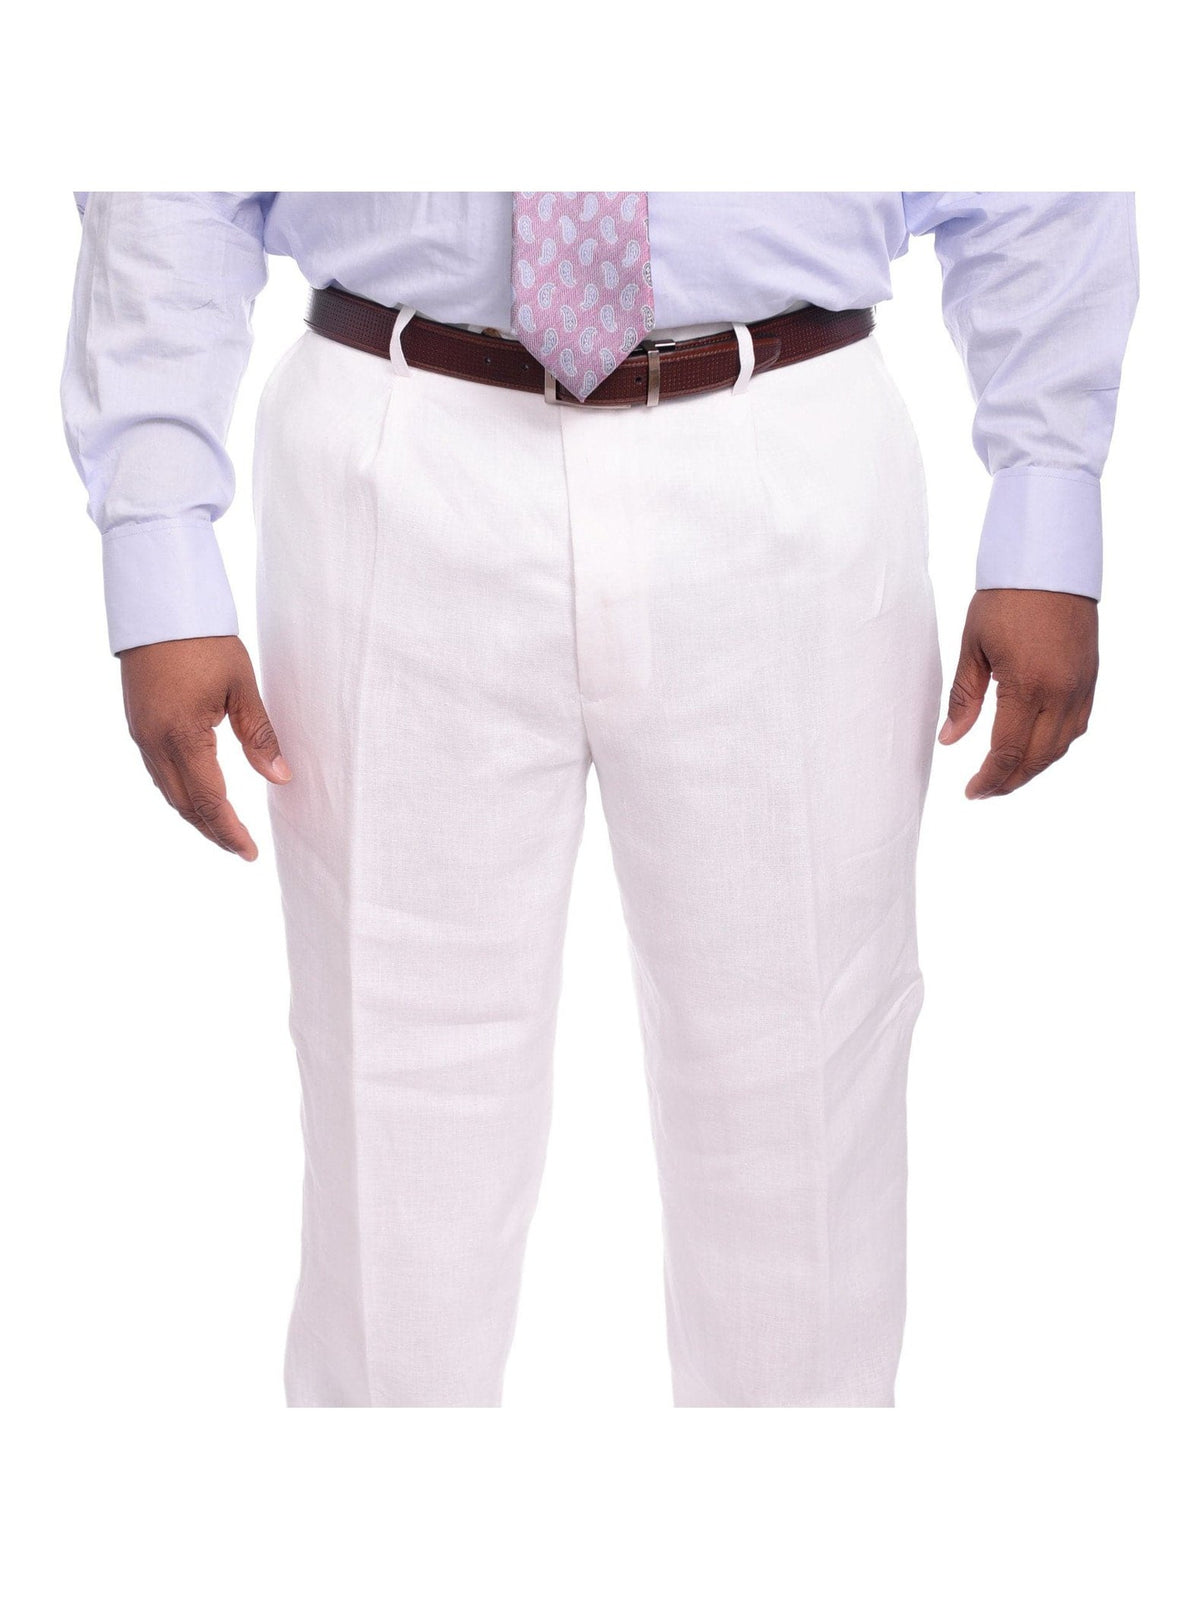 Apollo King Classic Fit Solid White Single Pleated Linen Dress Pants - The Suit Depot